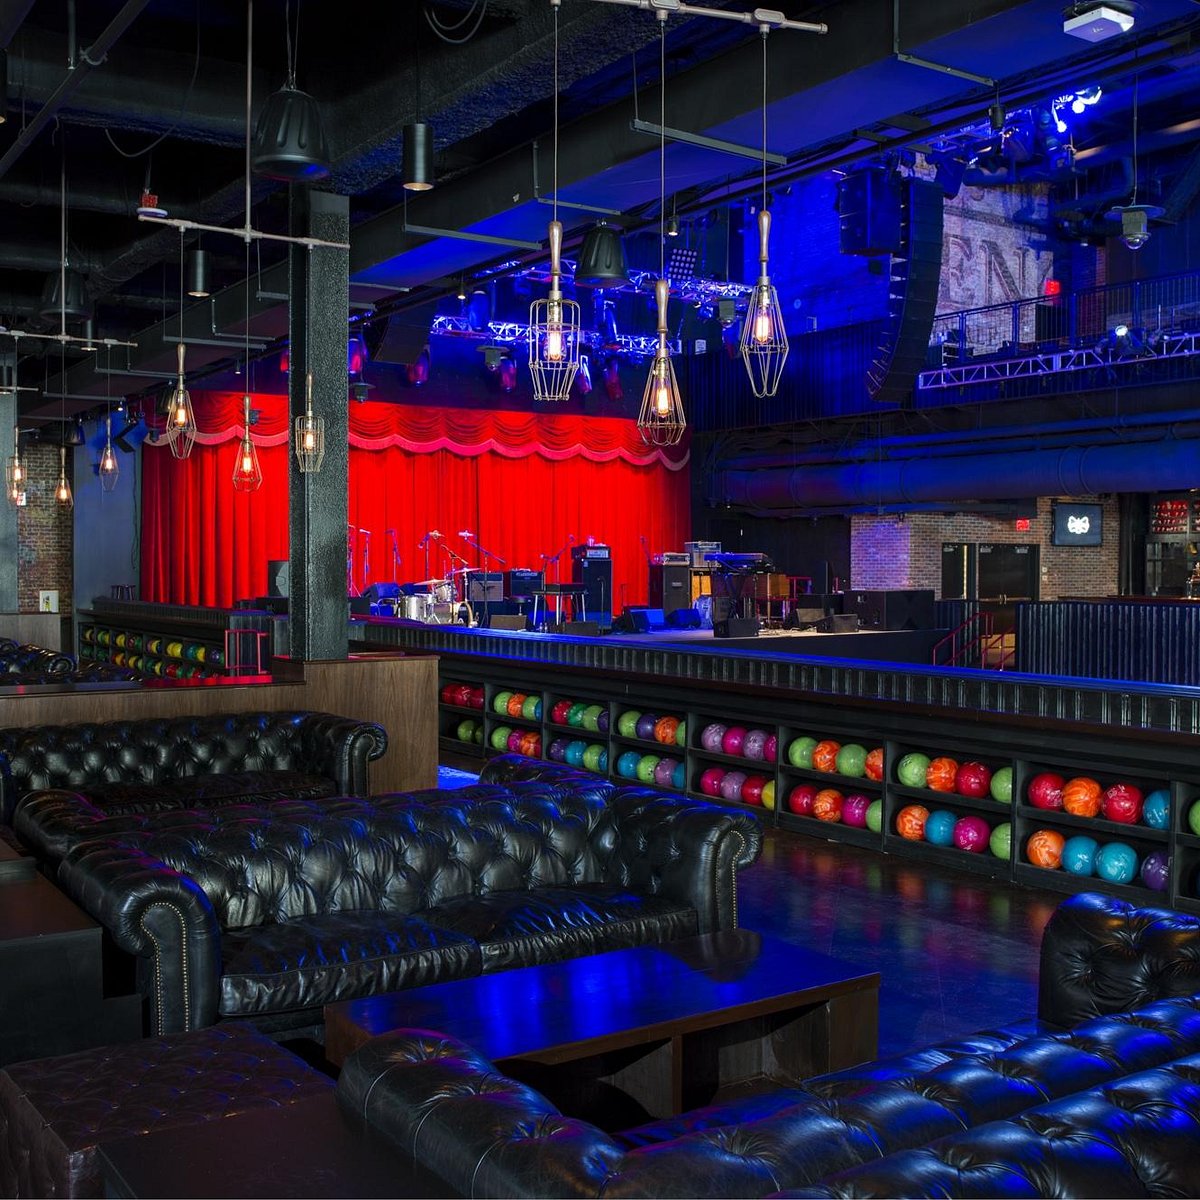 Brooklyn Bowl Las Vegas All You Need to Know BEFORE You Go